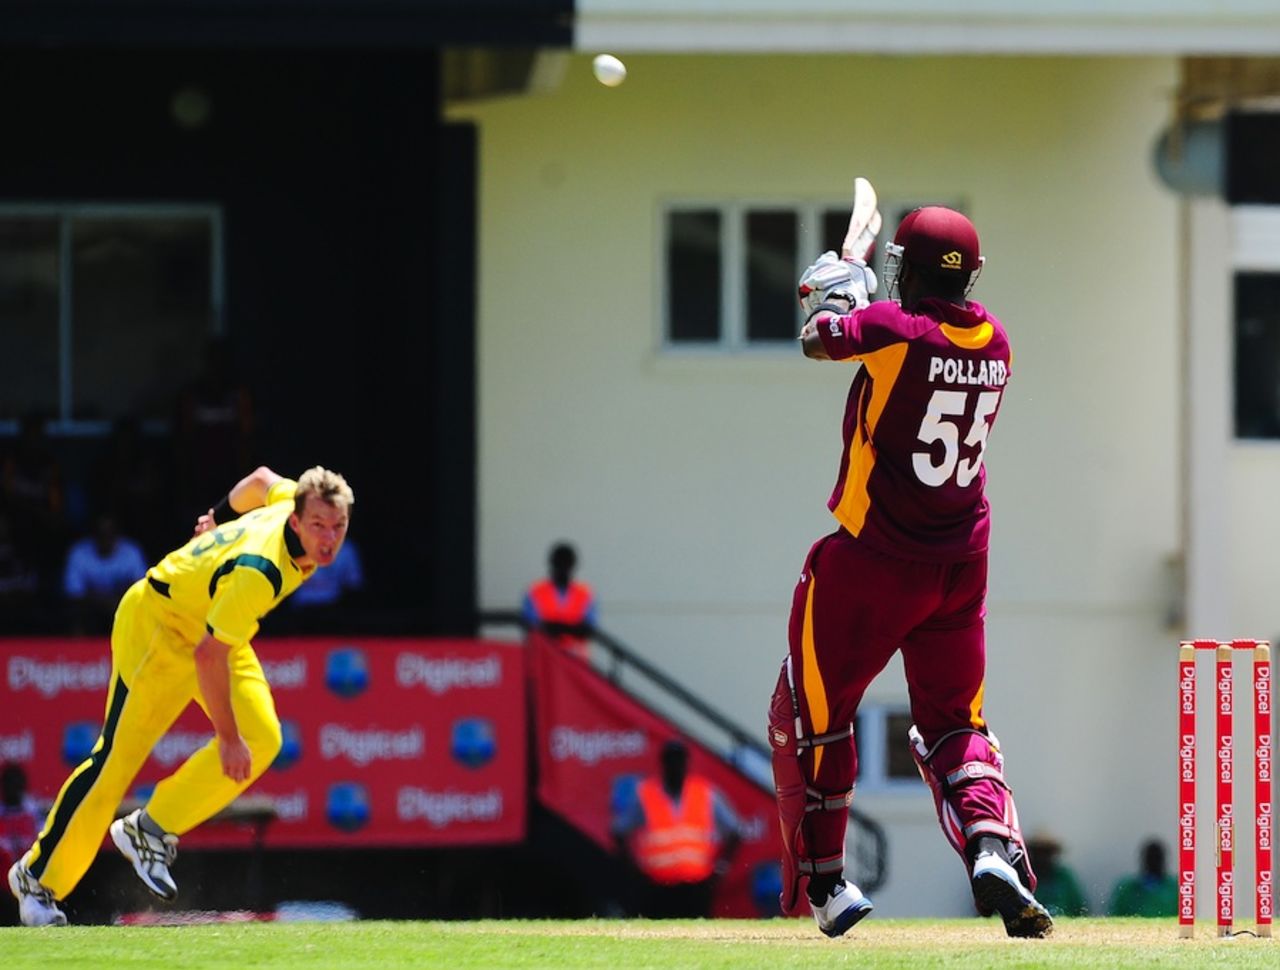 Kieron Pollard carts Brett Lee for a six to bring up his hundred, West Indies v Australia, 4th ODI, Gros Islet, March 23, 2012